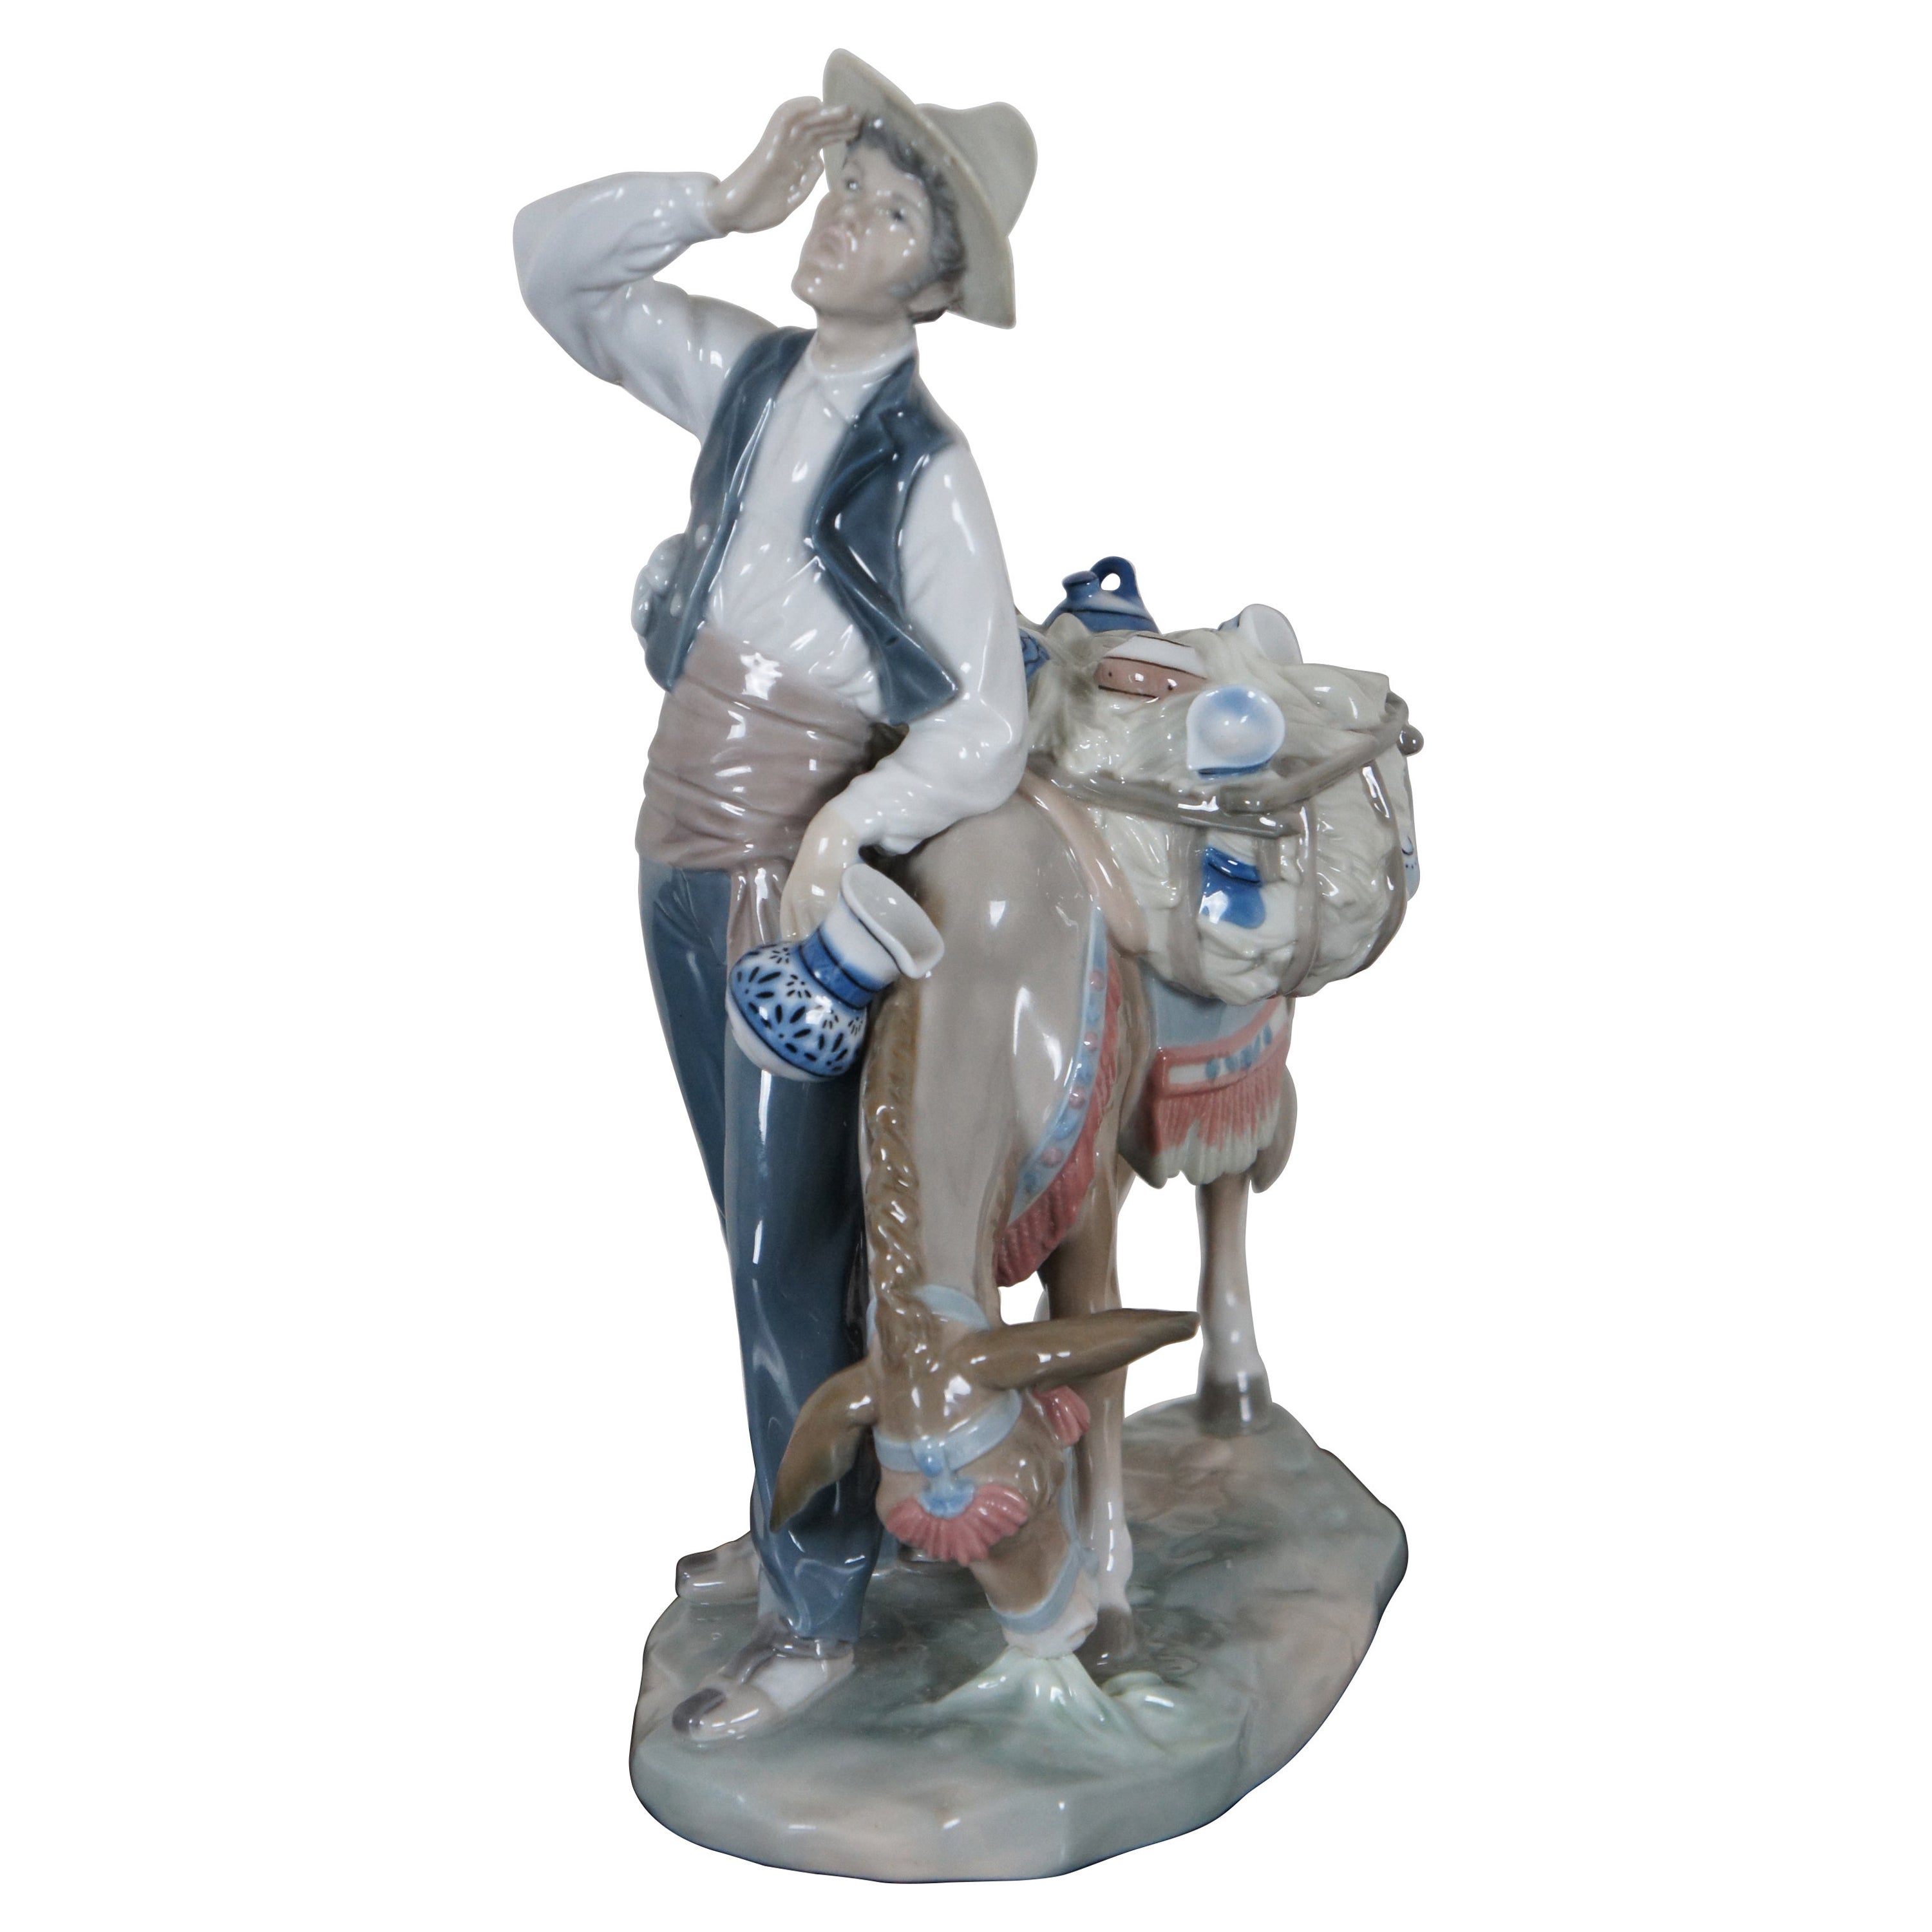 Lladro Retired - 6 For Sale on 1stDibs